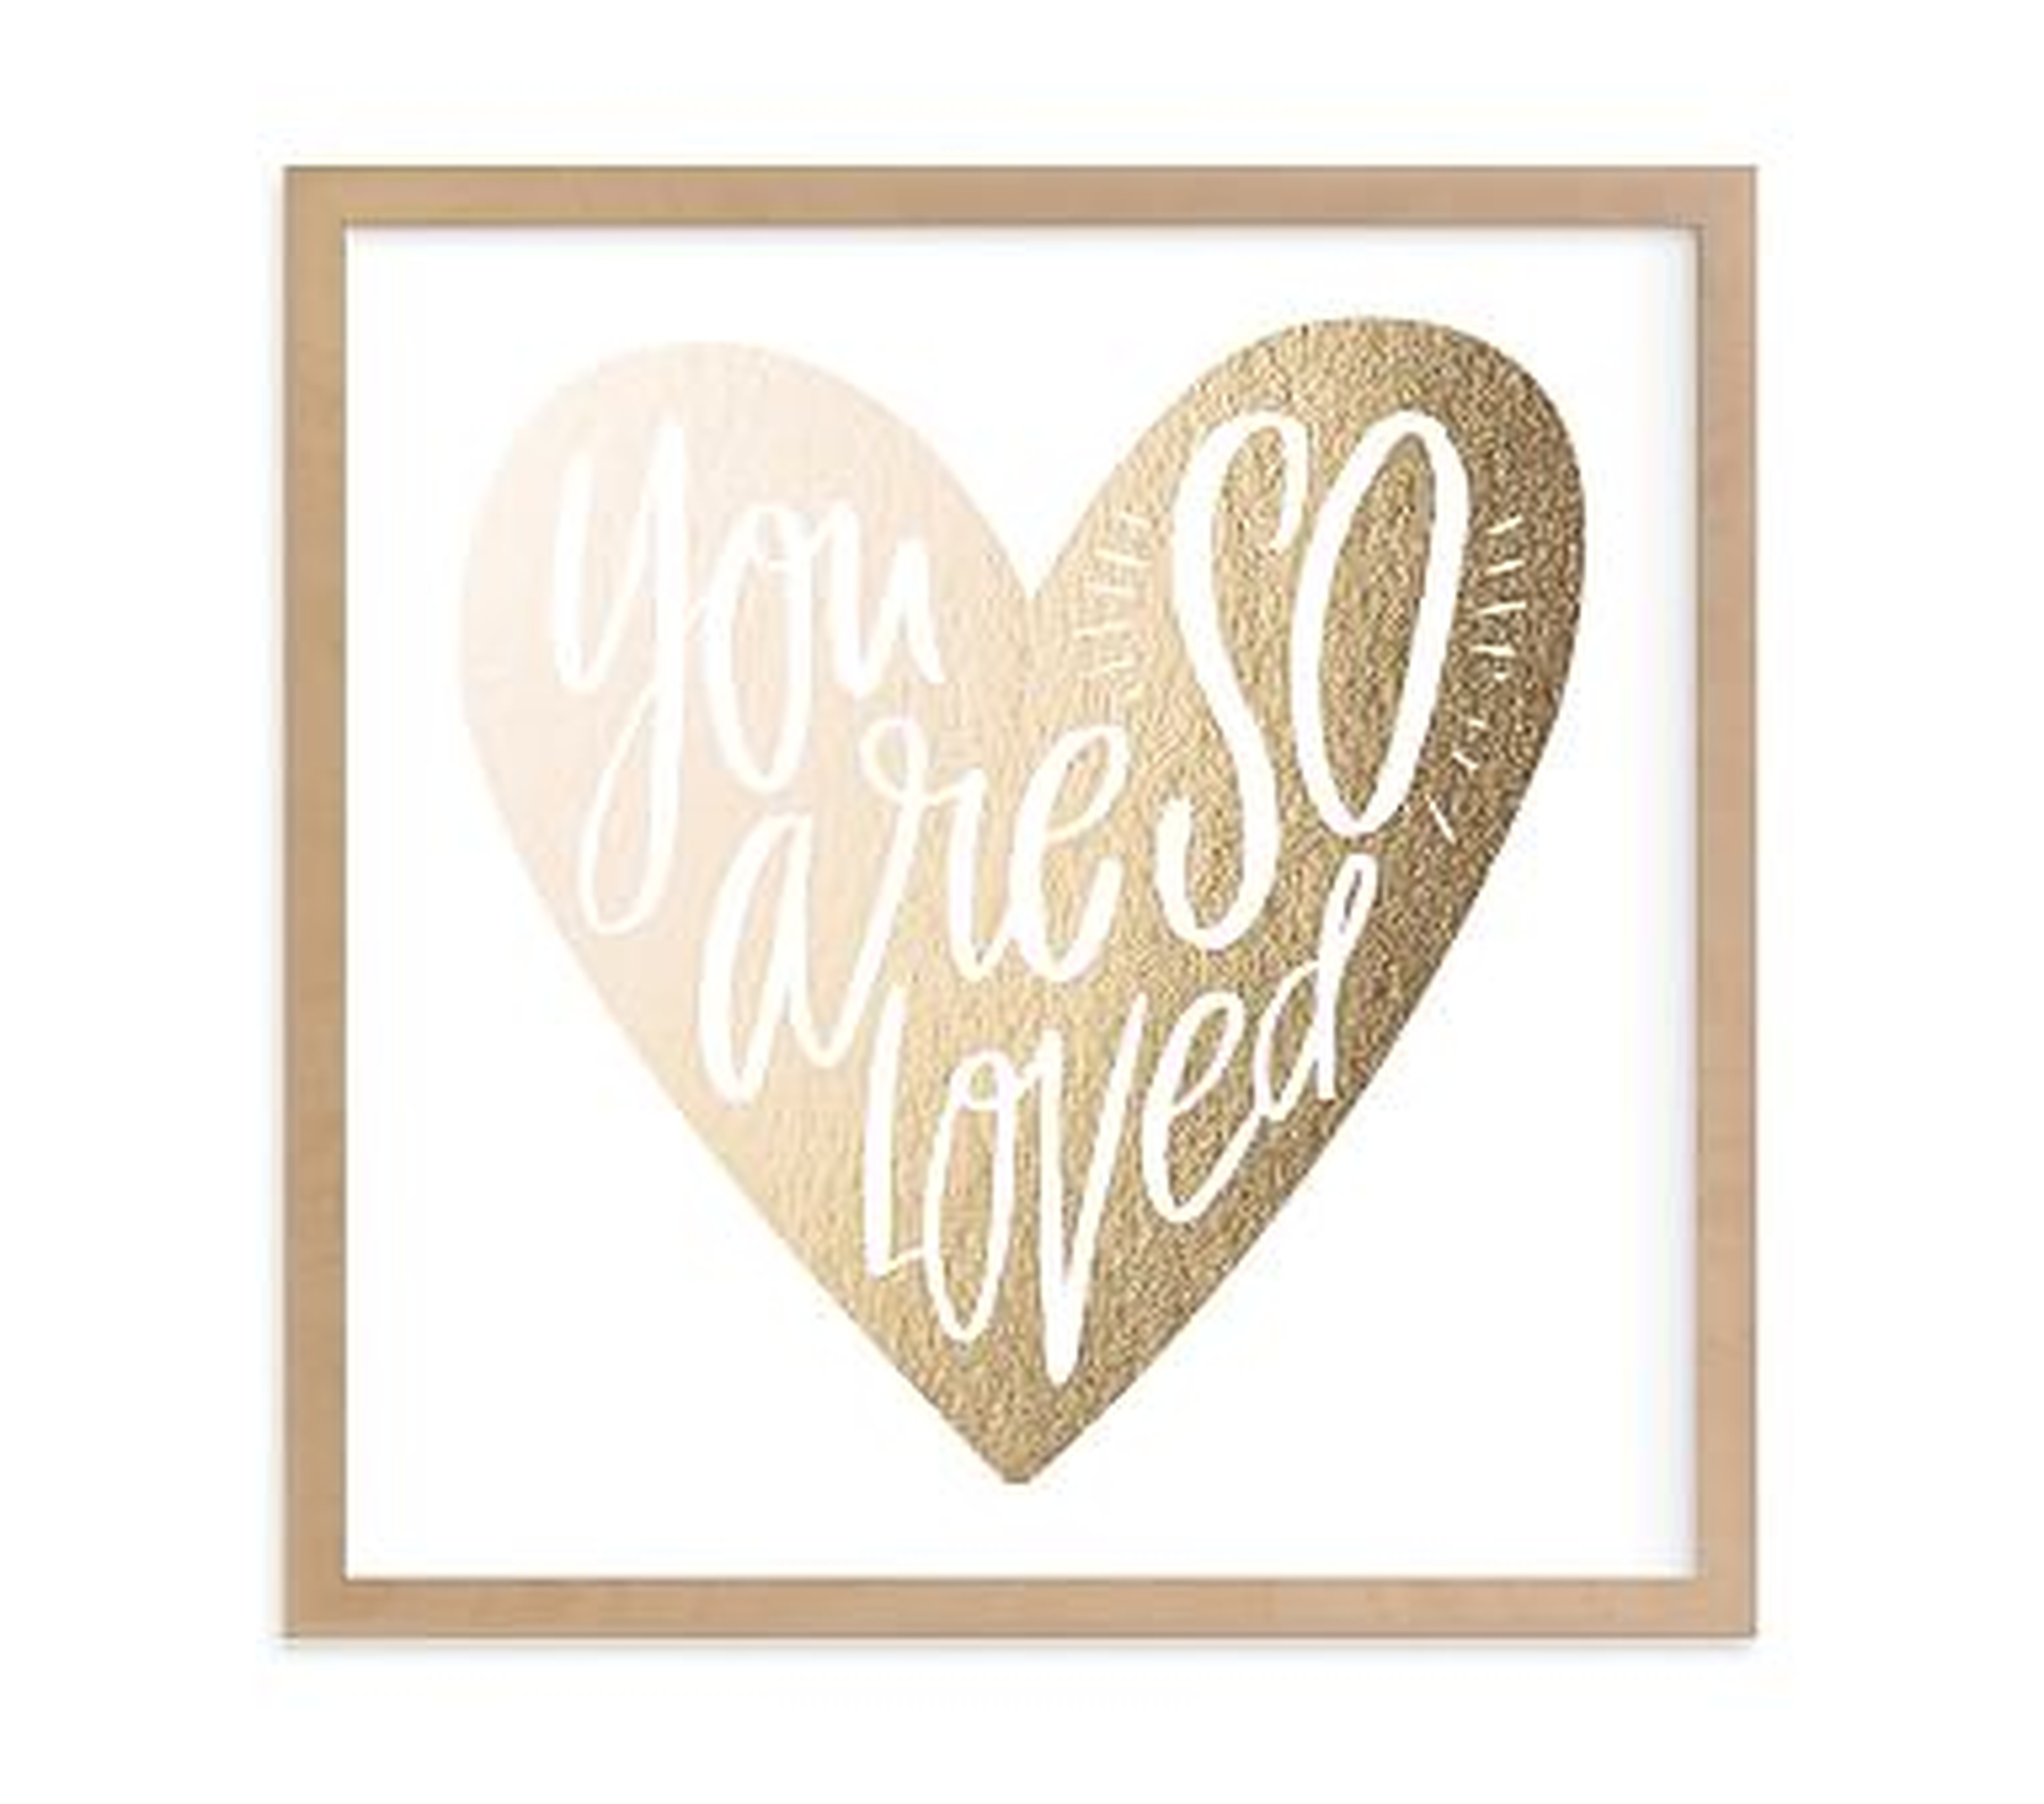 So Loved Heart Wall Art by Minted(R) 8x8, Natural - Pottery Barn Kids